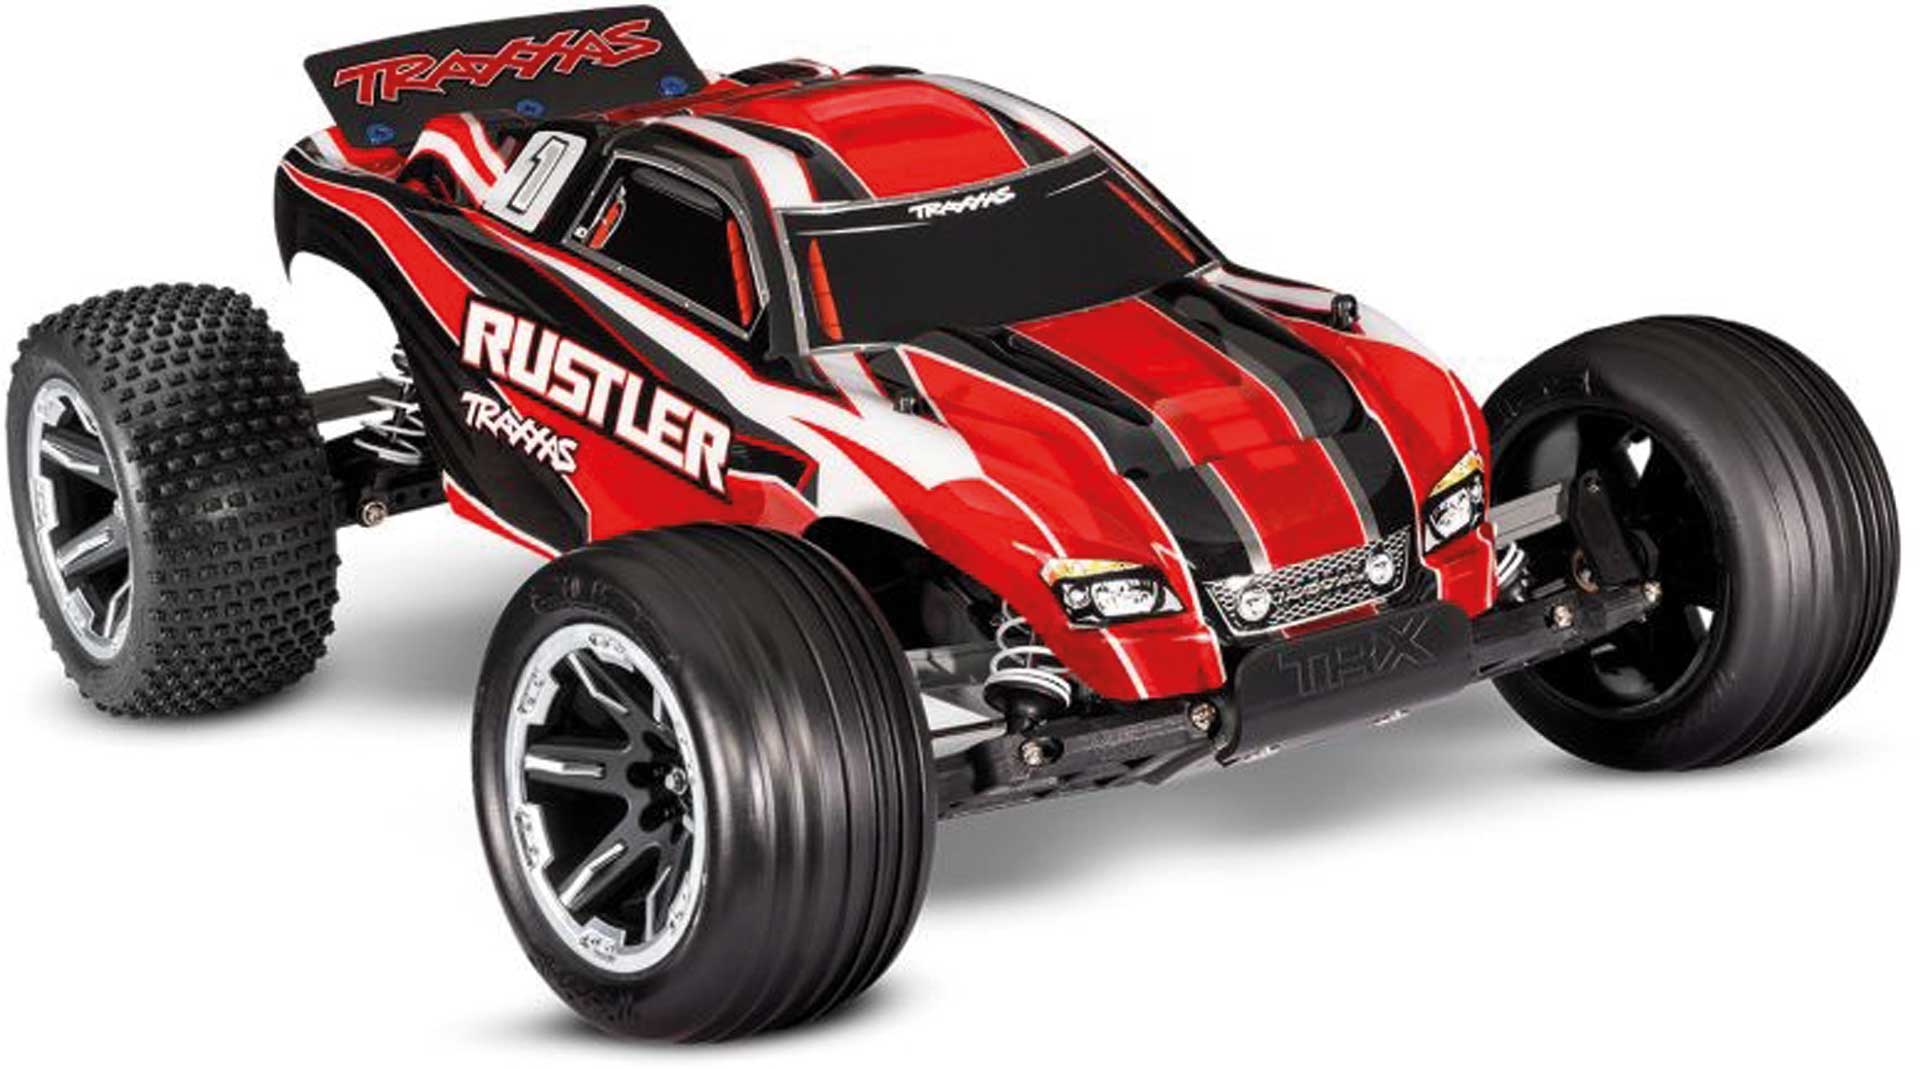 TRAXXAS RUSTLER RED 1/10 2WD STADIUM-TRUCK RTR BRUSHED, WITH BATTERY AND 4AMP USB-C-CHARGER